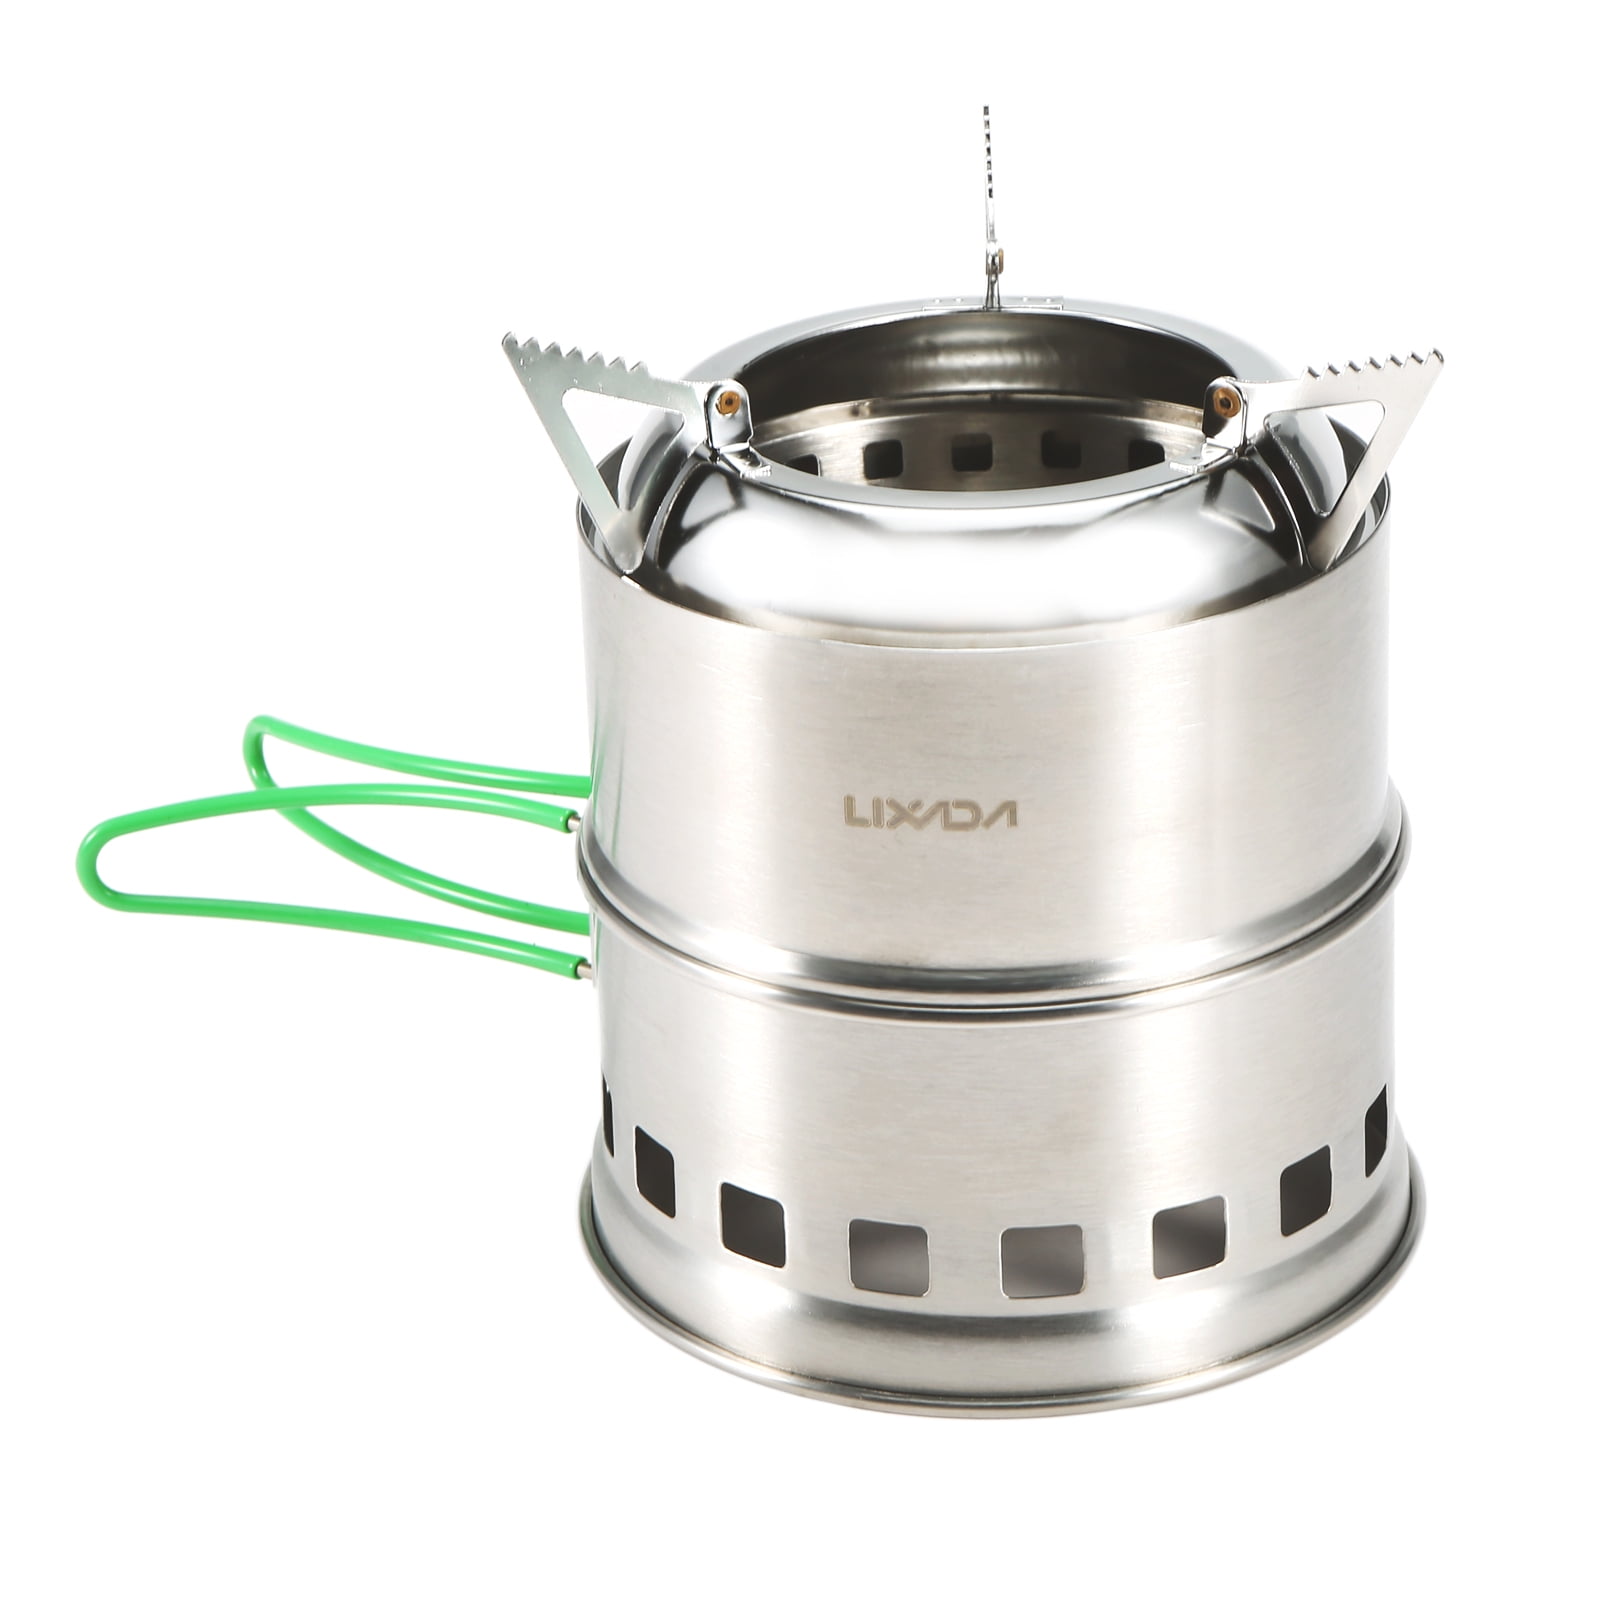 Lixada Camping Stove Alcohol Wood Stove Lightweight Compact Optional Portable Stainless Stee Alcohol Wood Stove with Storage Bag for Outdoor Camping Picnic WIR0868166456234K Durable Pot Pan Bowls Cookware Mess Kit for Outdoor Hiking Camping Picnic Stove 